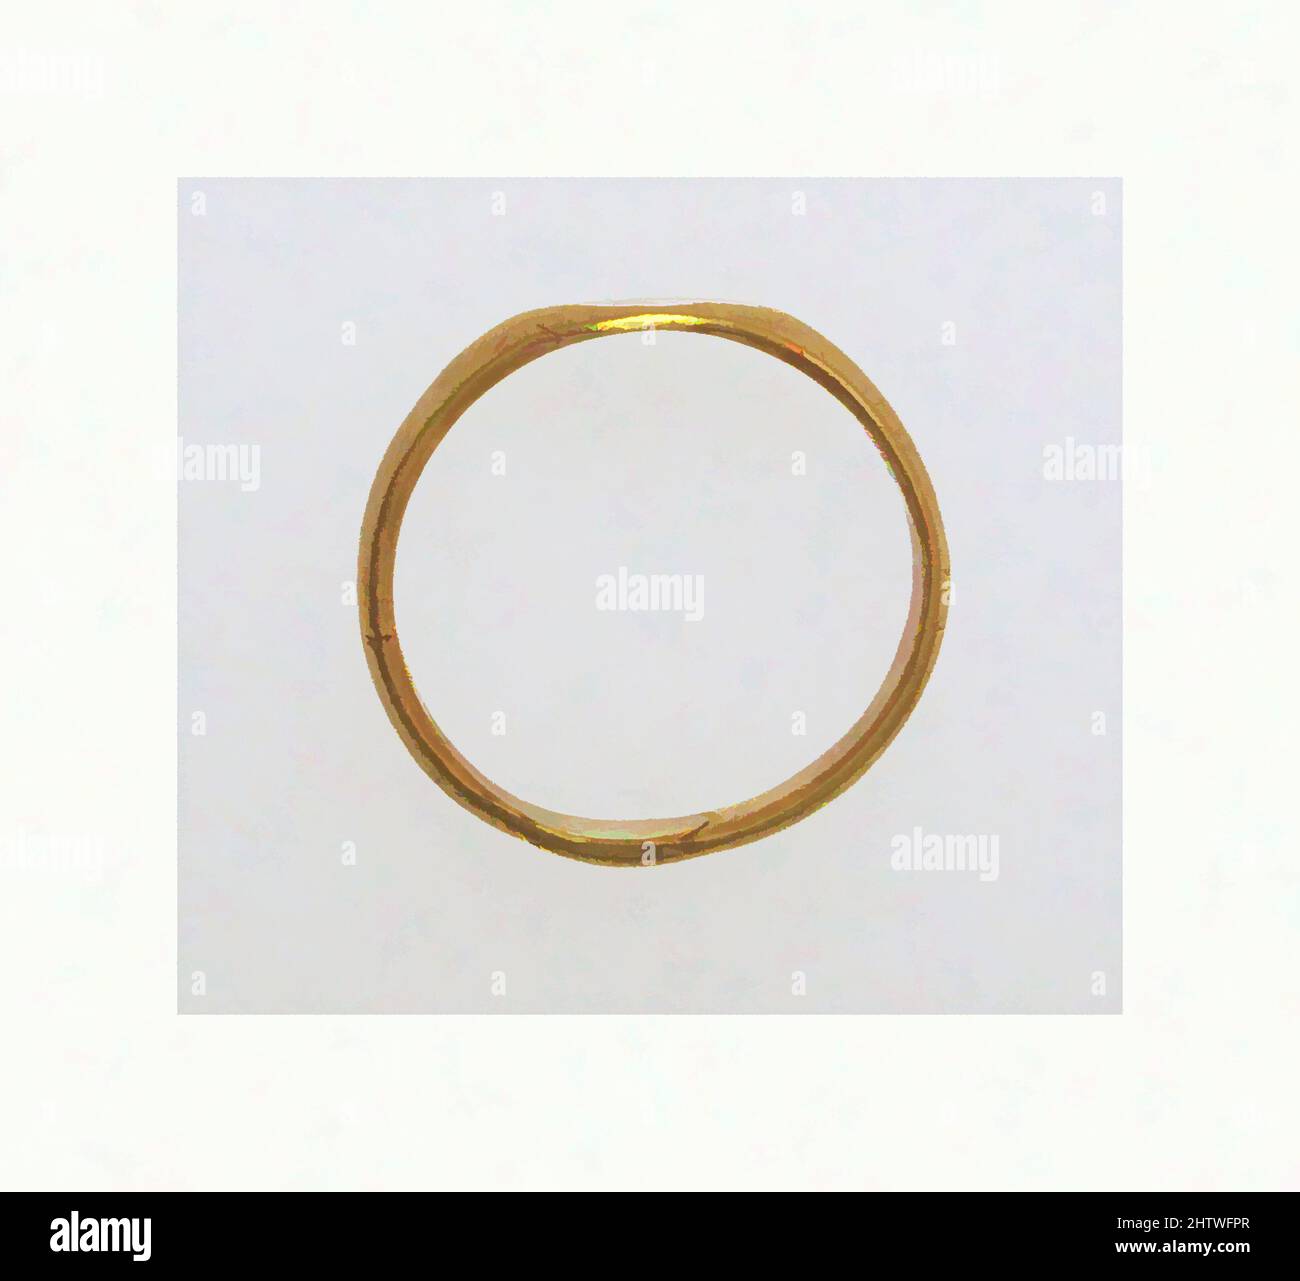 Art inspired by Ring, Gold, Diameter: 13/16 × 1/4 in. (2.1 × 0.6 cm), Gold and Silver, Classic works modernized by Artotop with a splash of modernity. Shapes, color and value, eye-catching visual impact on art. Emotions through freedom of artworks in a contemporary way. A timeless message pursuing a wildly creative new direction. Artists turning to the digital medium and creating the Artotop NFT Stock Photo